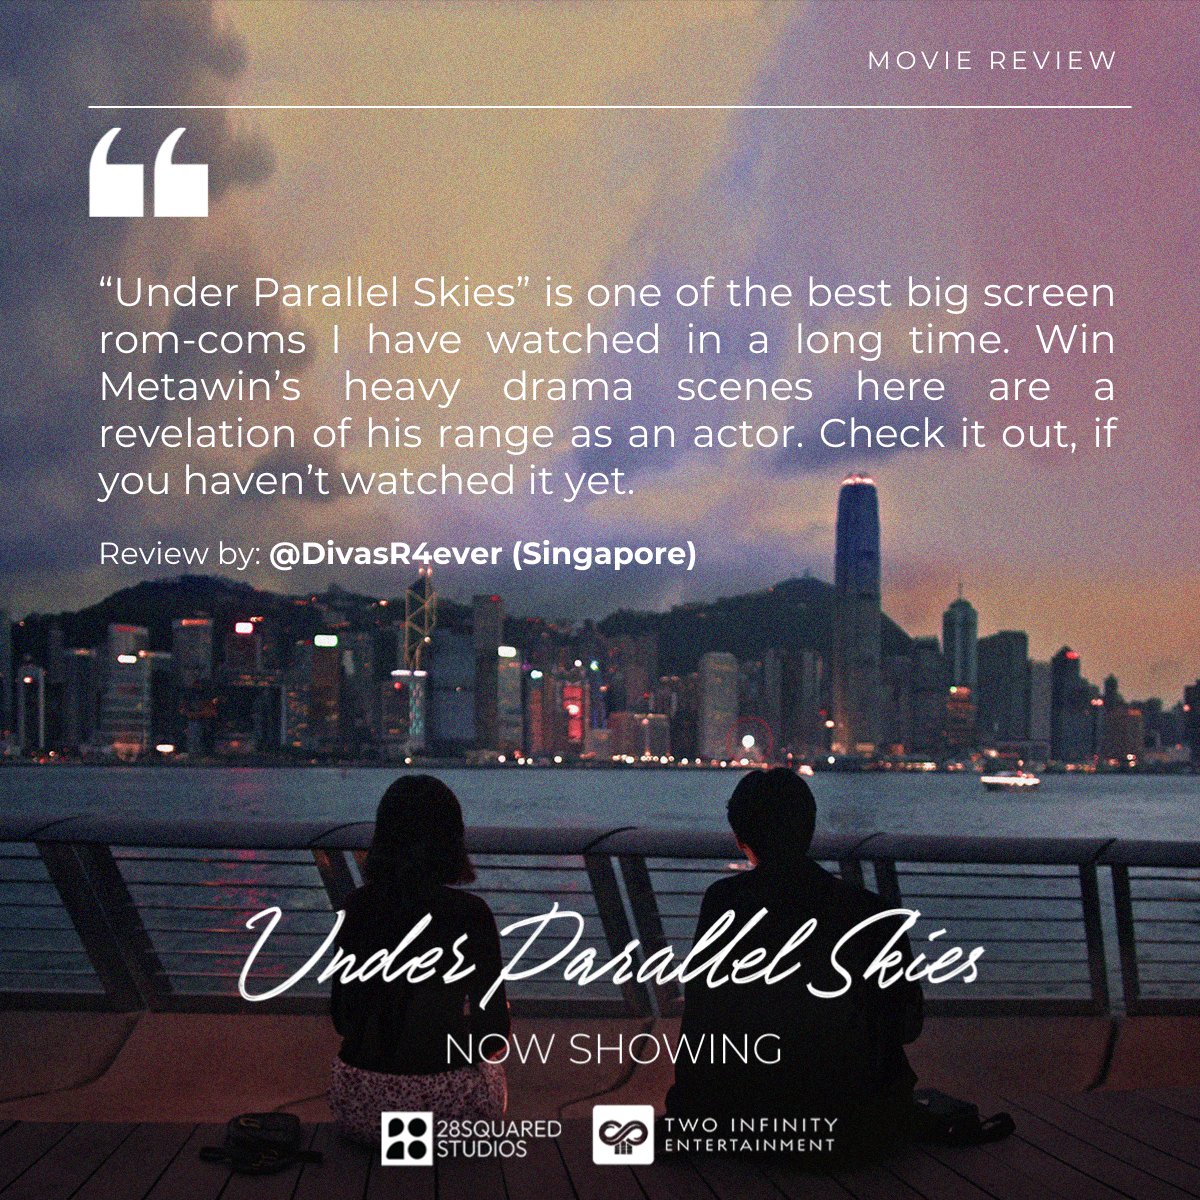 MOVIE REVIEW (Singapore): 'Under Parallel Skies' is one of the best big screen rom-coms I have watched in a long time.

See for yourself! Catch #WinMetawin and #JanellaSalvador in one of the most anticipated film collaborations of the year in Asia, #UnderParallelSkies, at cinemas…